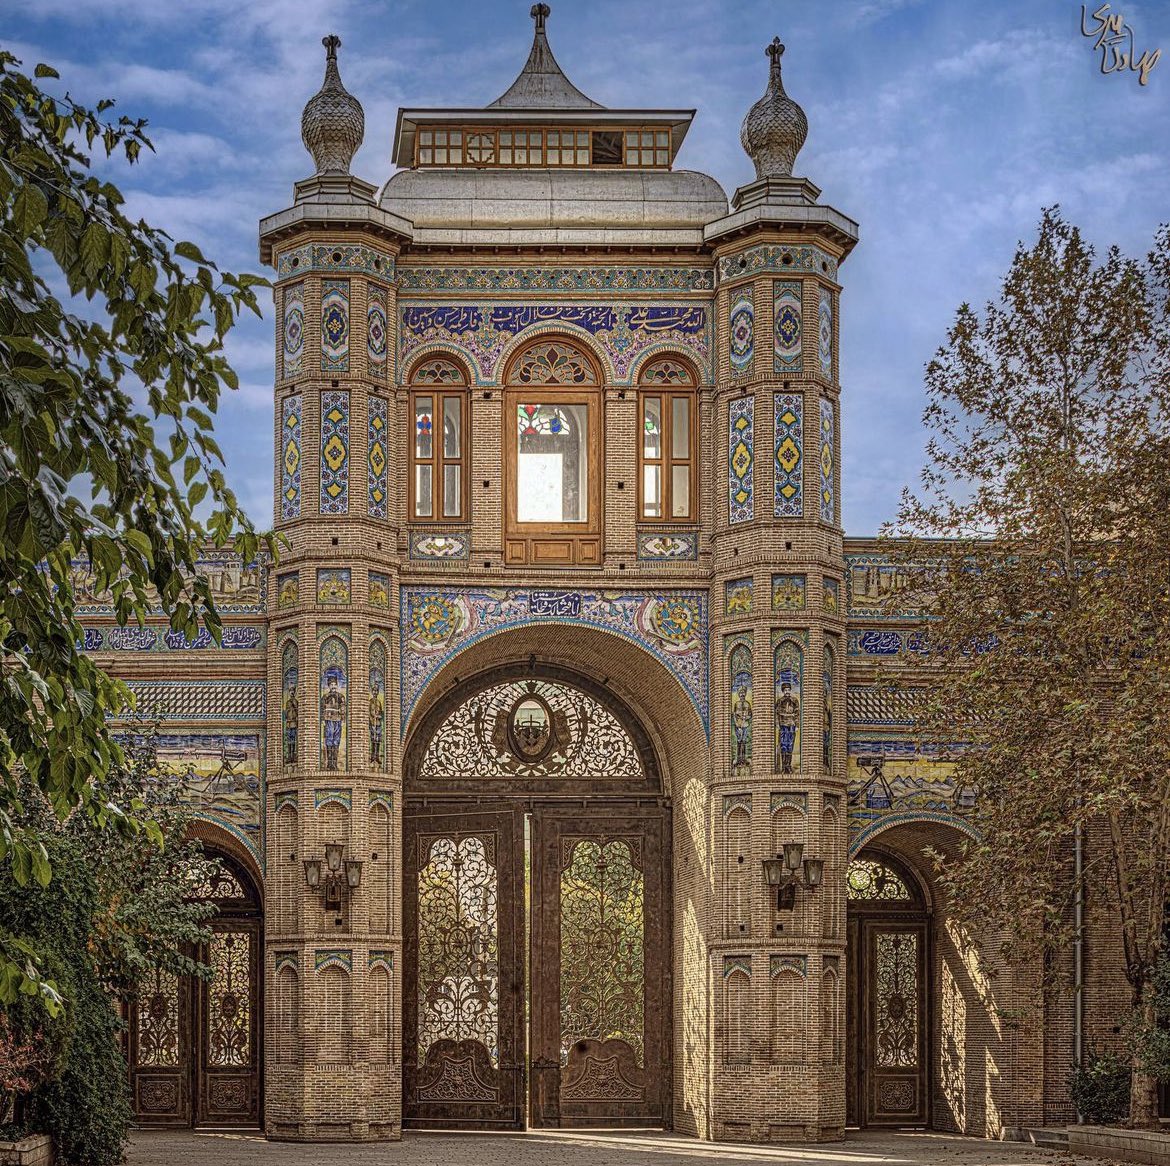 The gate of the National Garden (bagh) in Tehran, built during the Qajar period 

By: Sadegh Miri